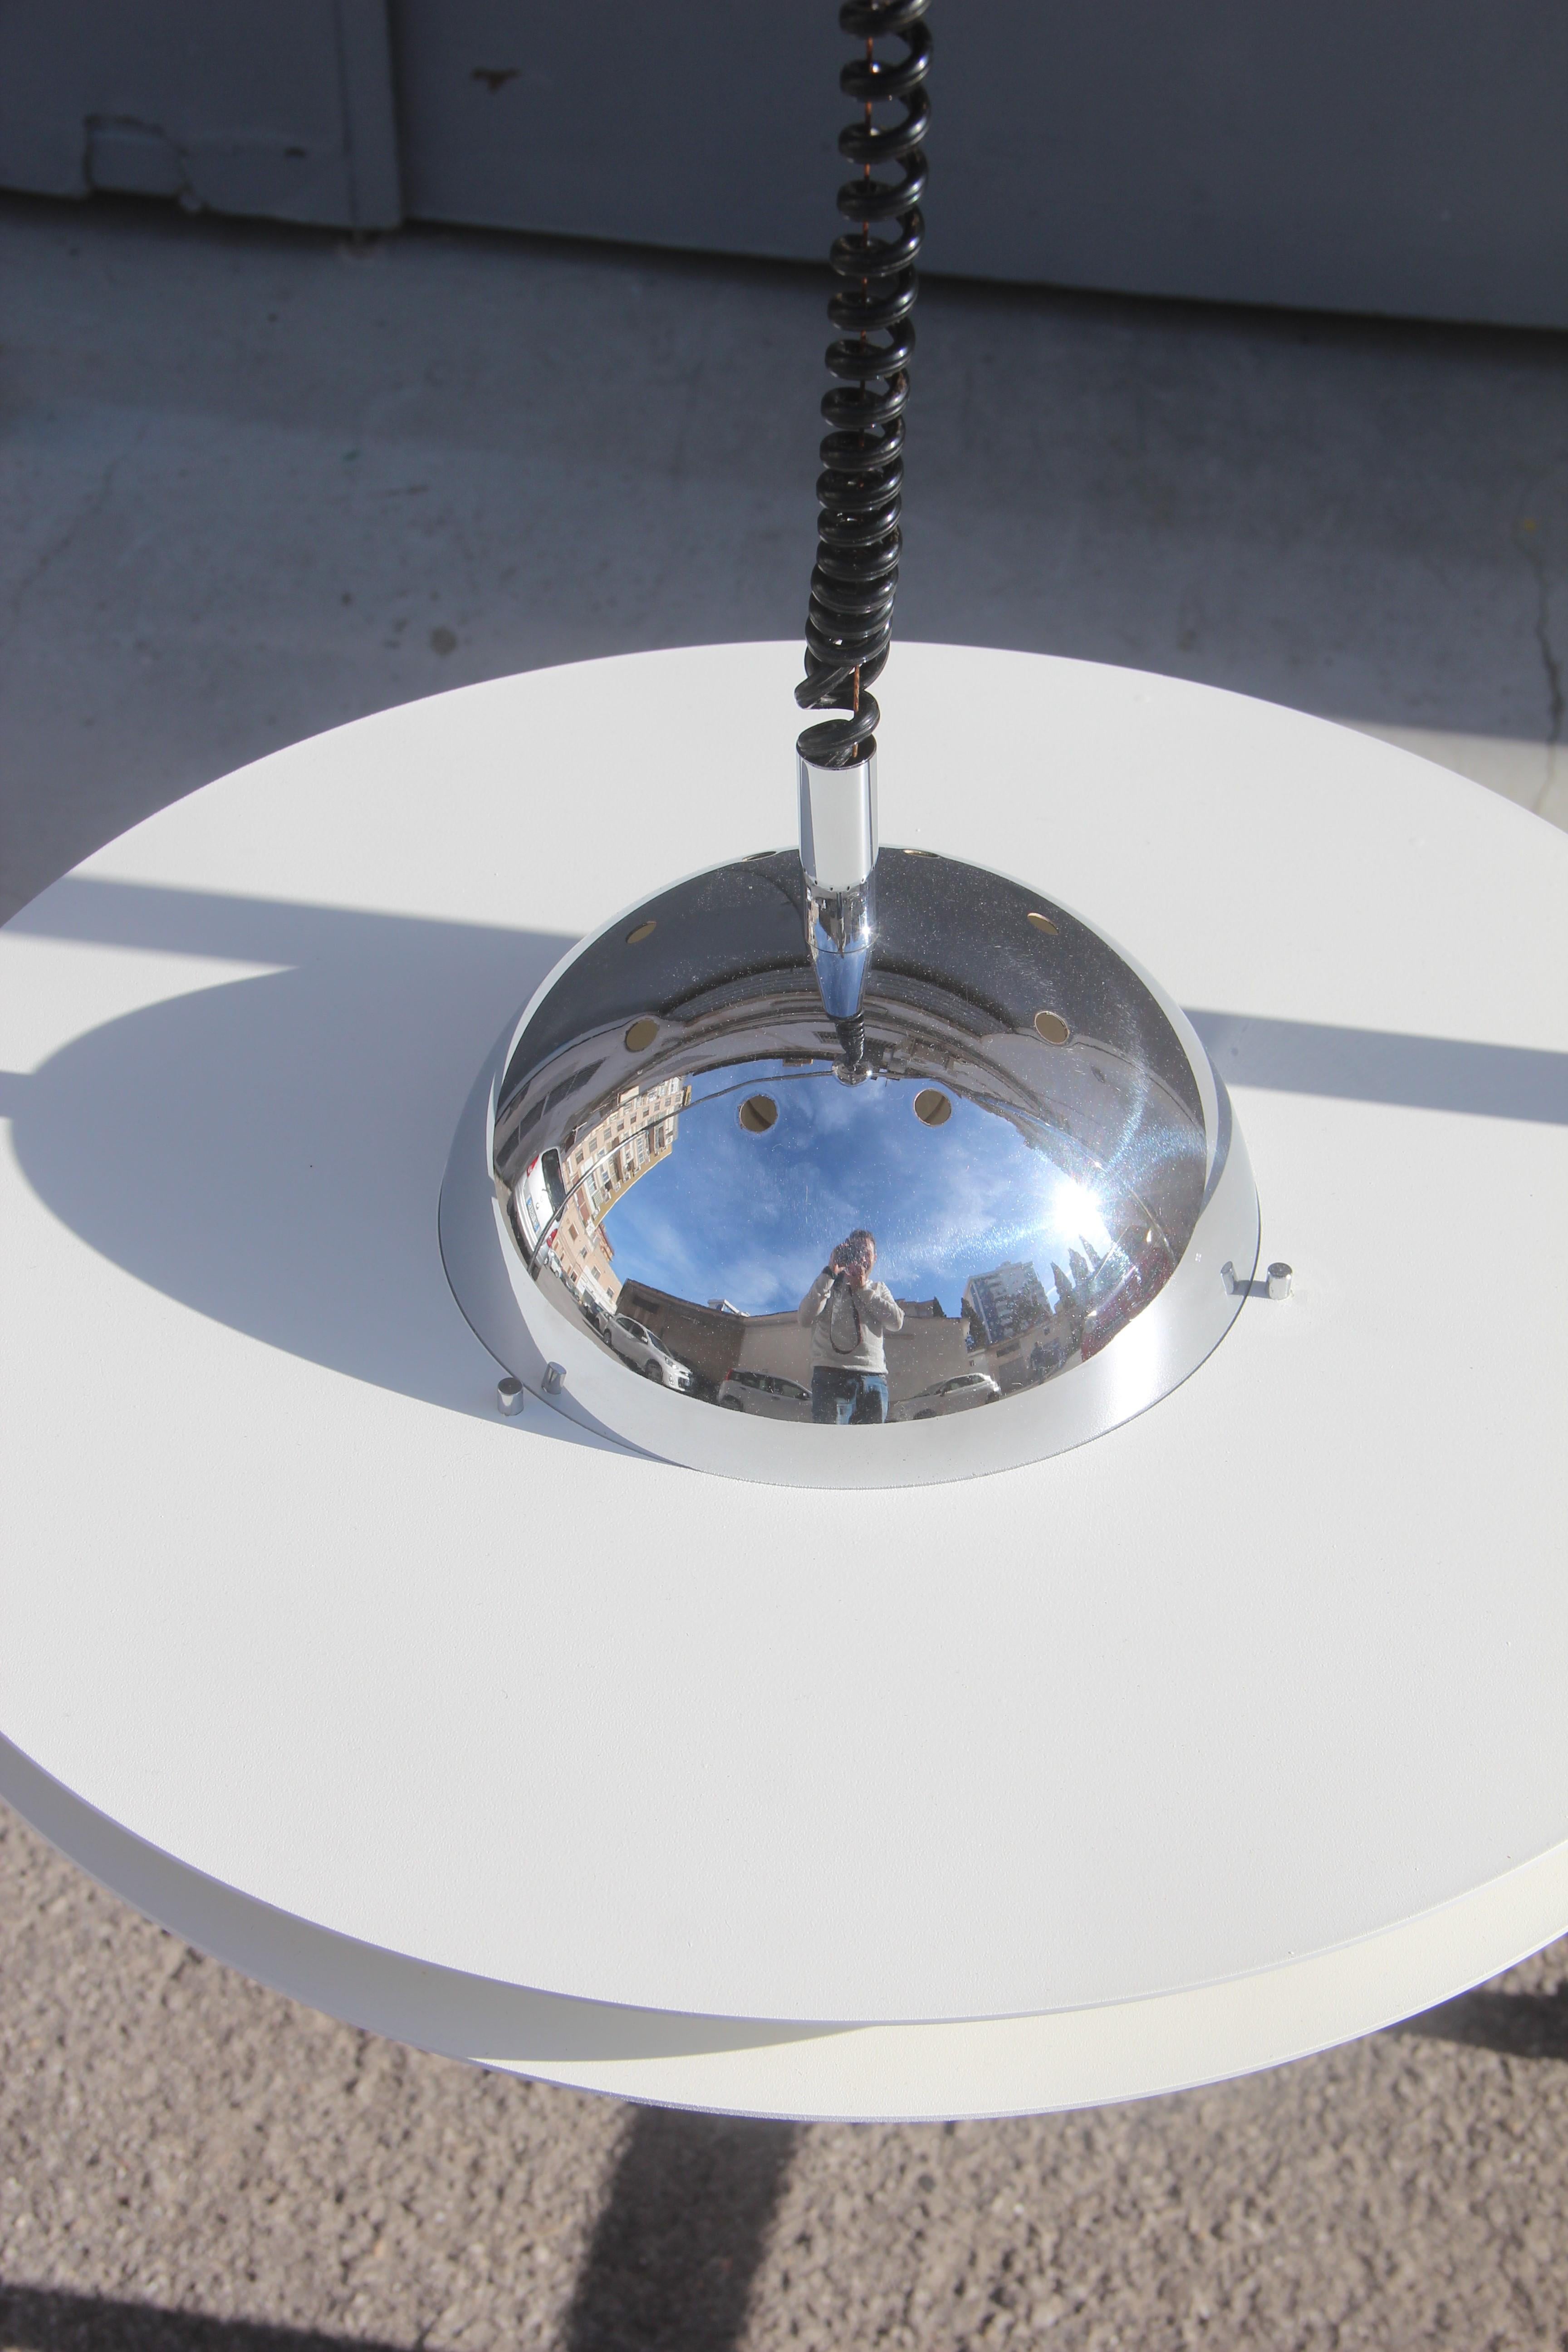 Chrome Pierre Paulin French Ceiling Lamp White Silver Round Ufo Design Pop Art, 1960 For Sale